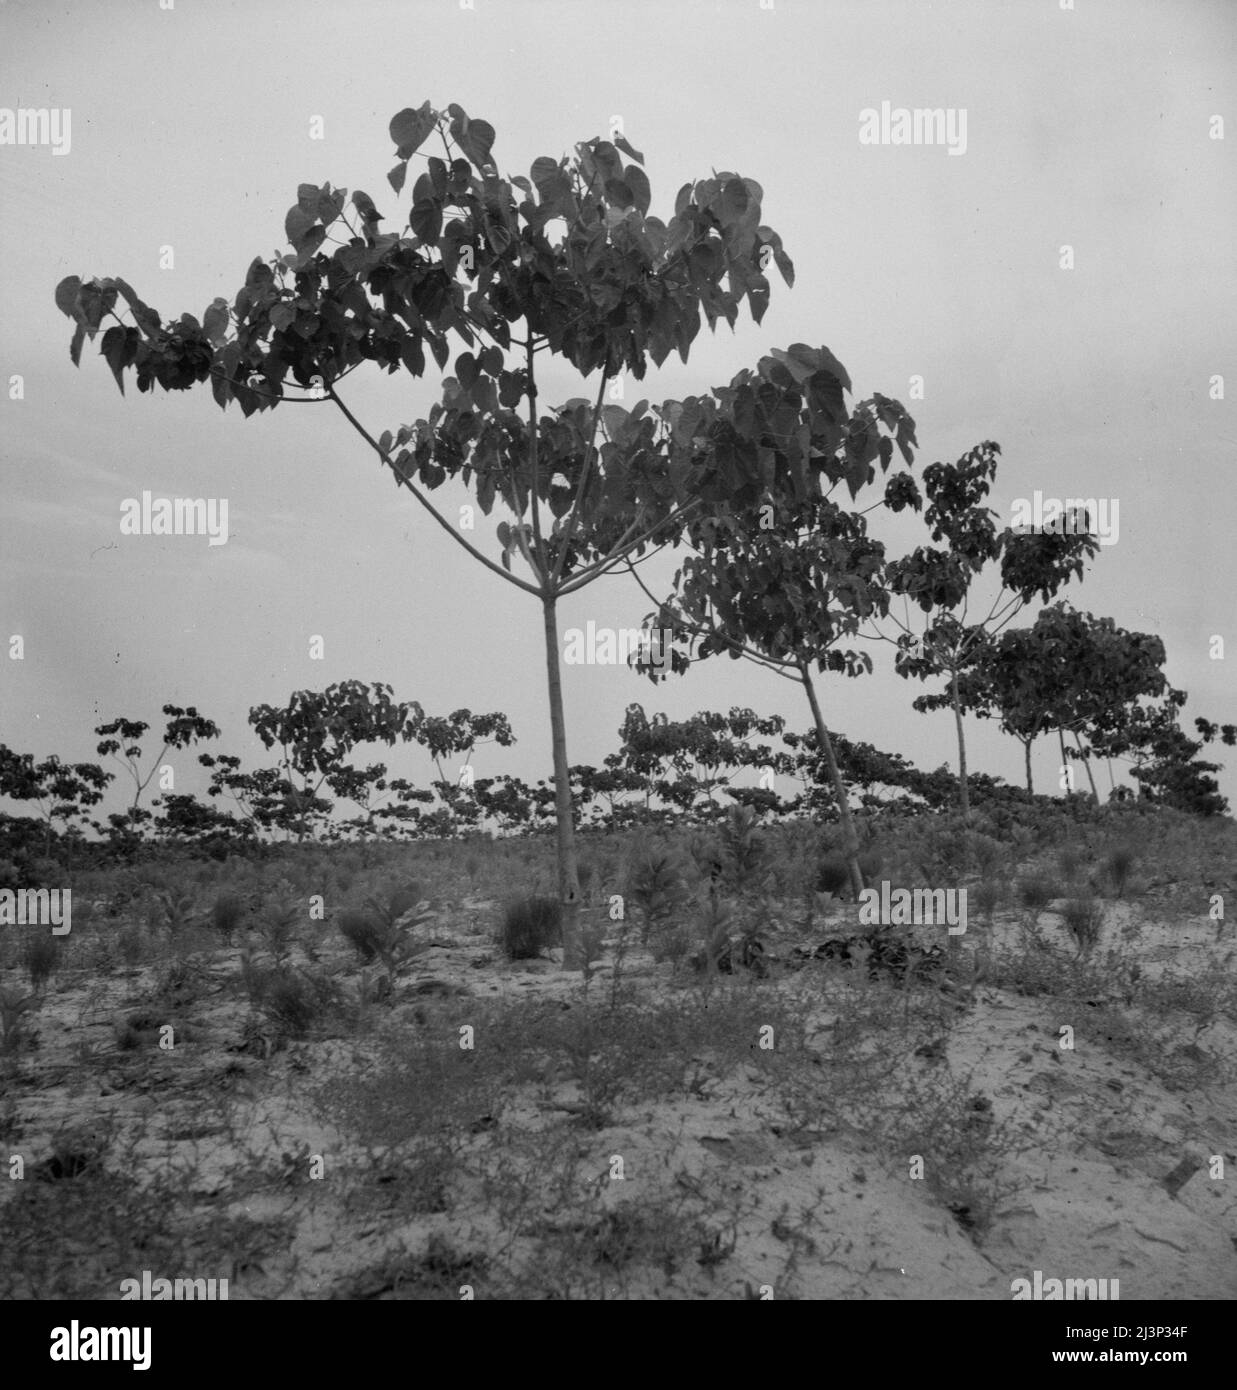 Tung oil grove near Mossy Head, Florida. This is a new development in the cultivation of naval stores for oil. The trees came from China, the nut, when pressed, yields an oil used in paint manufacture. Stock Photo